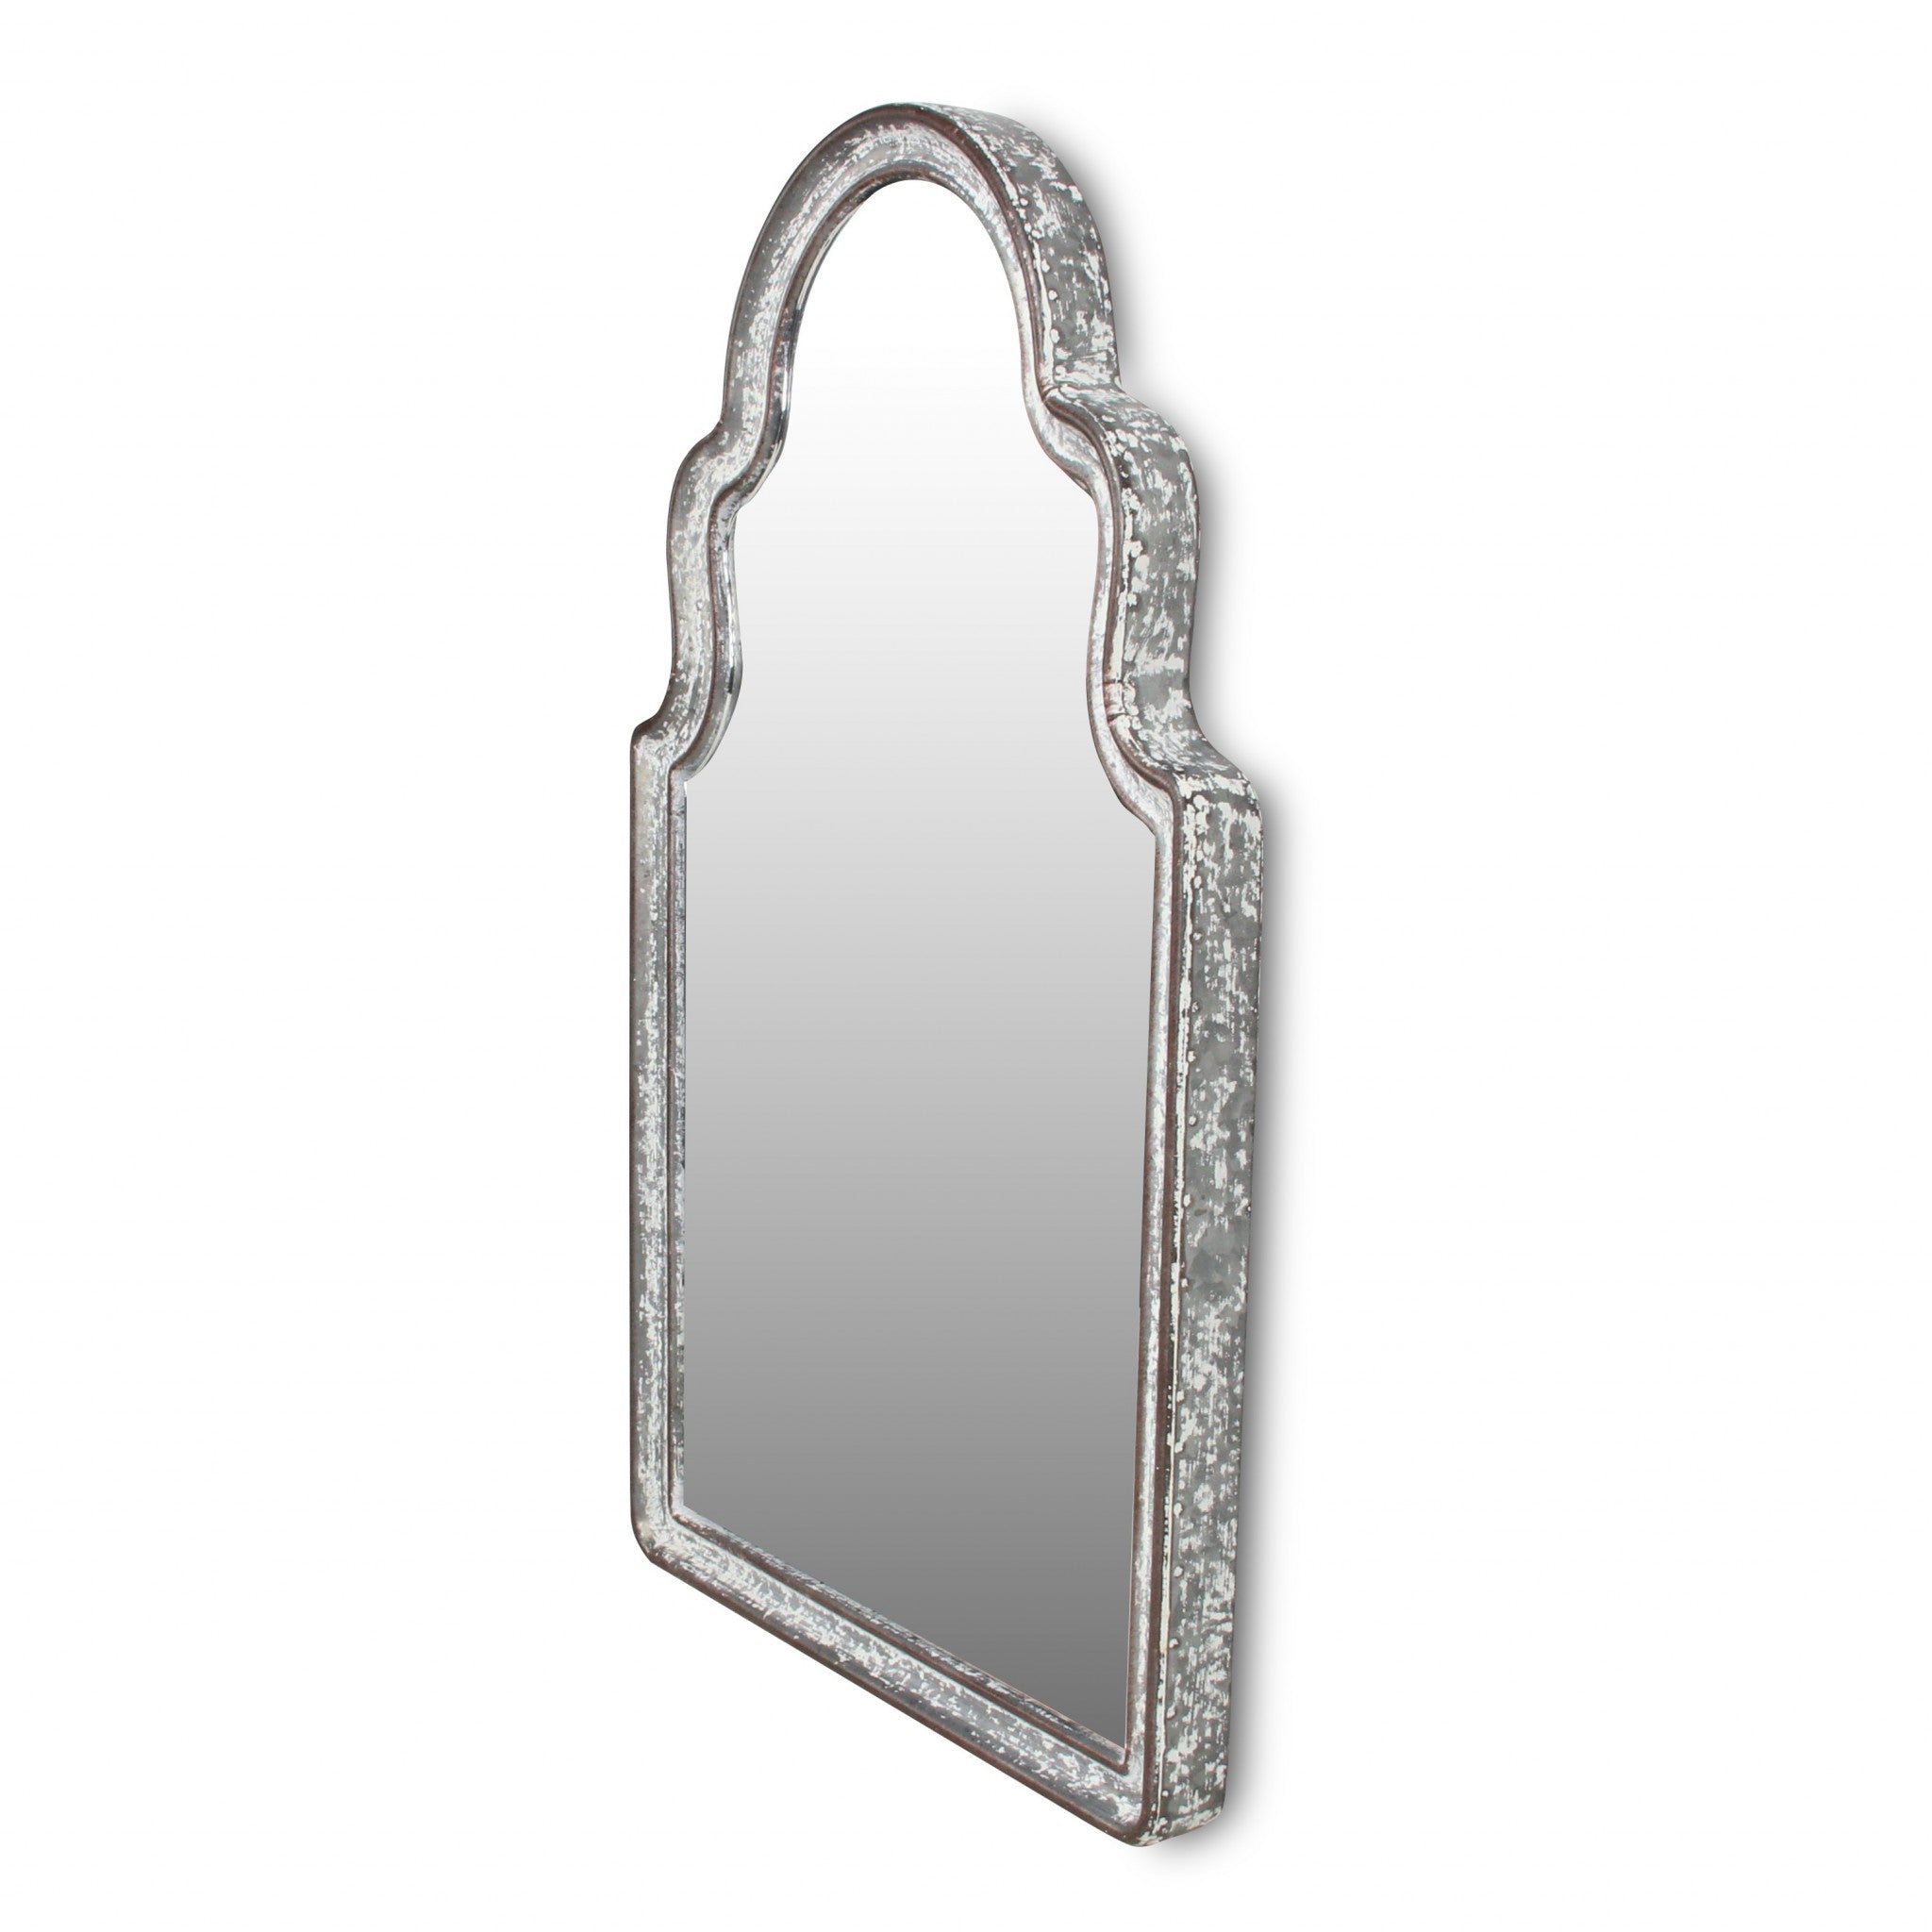 Vintage Curved Gray Wall Mirror | 14.25